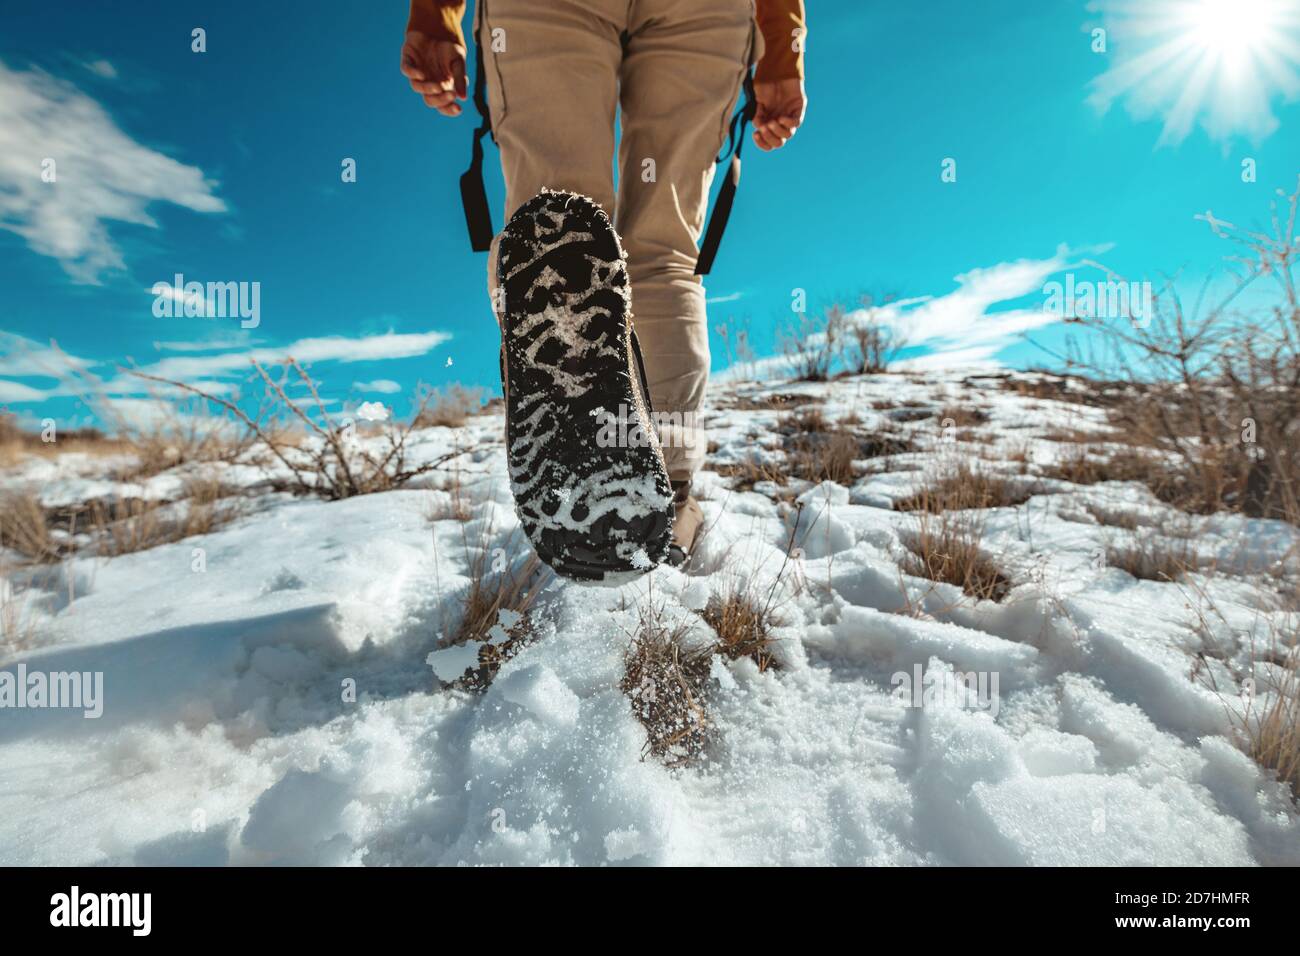 Lady hiker goes uphill by snowy surface. Closeup photo of woman legs Stock Photo